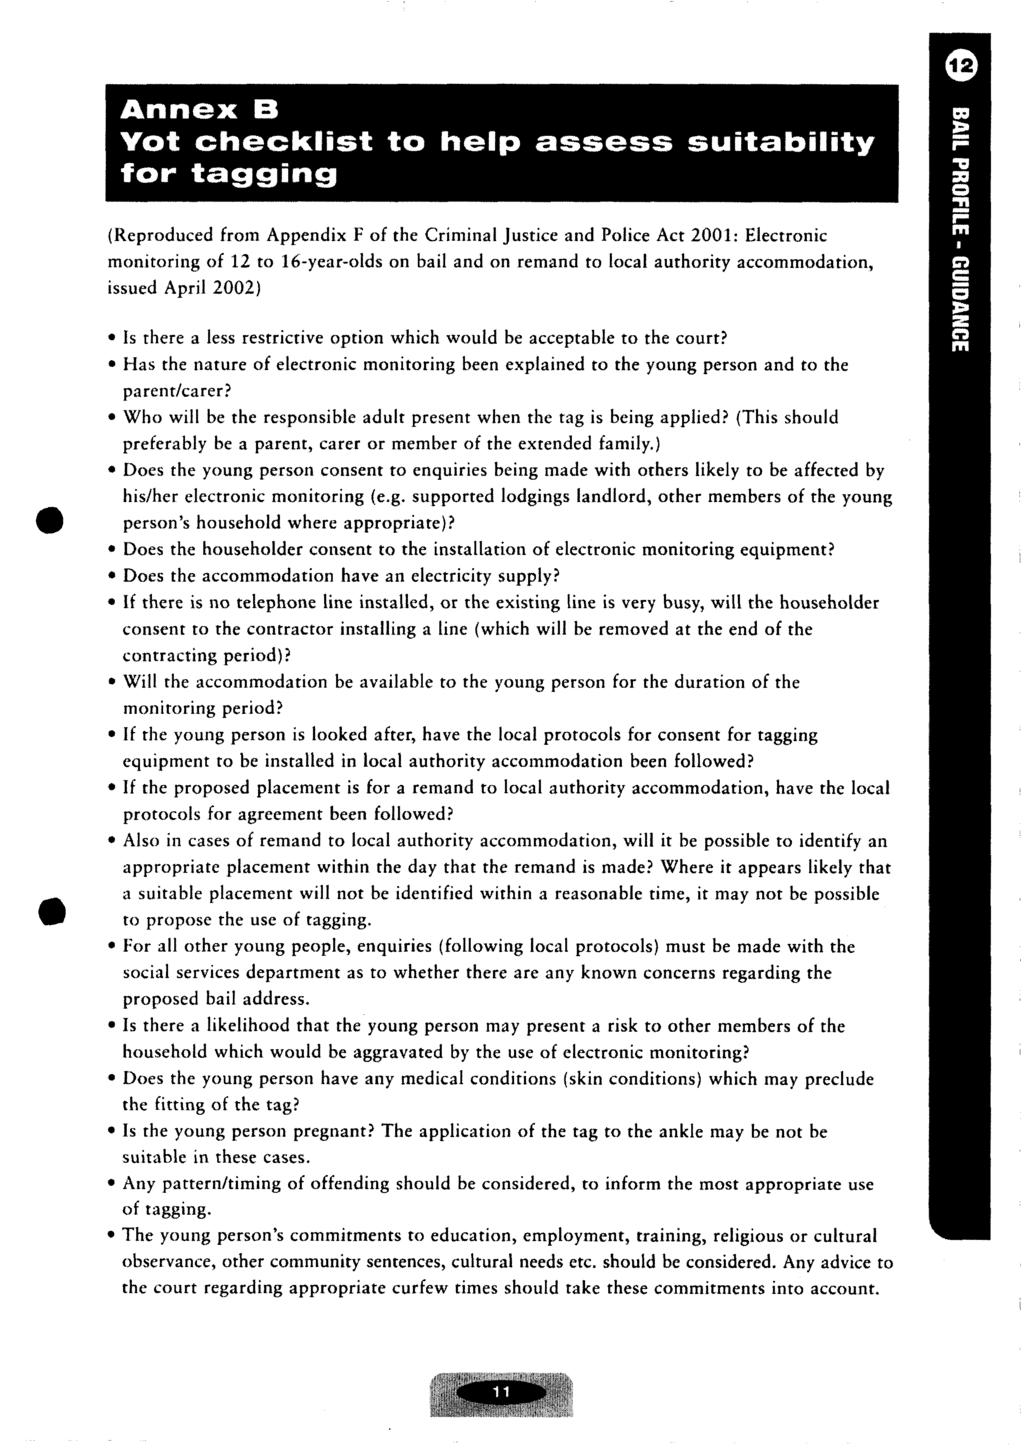 Annex Yot checklist to help assess suitability for tagging (Reproduced from Appendix F of the Criminal Justice and Police Act 2001: Electronic monitoring of 12 to 16-year-olds on bail and on remand